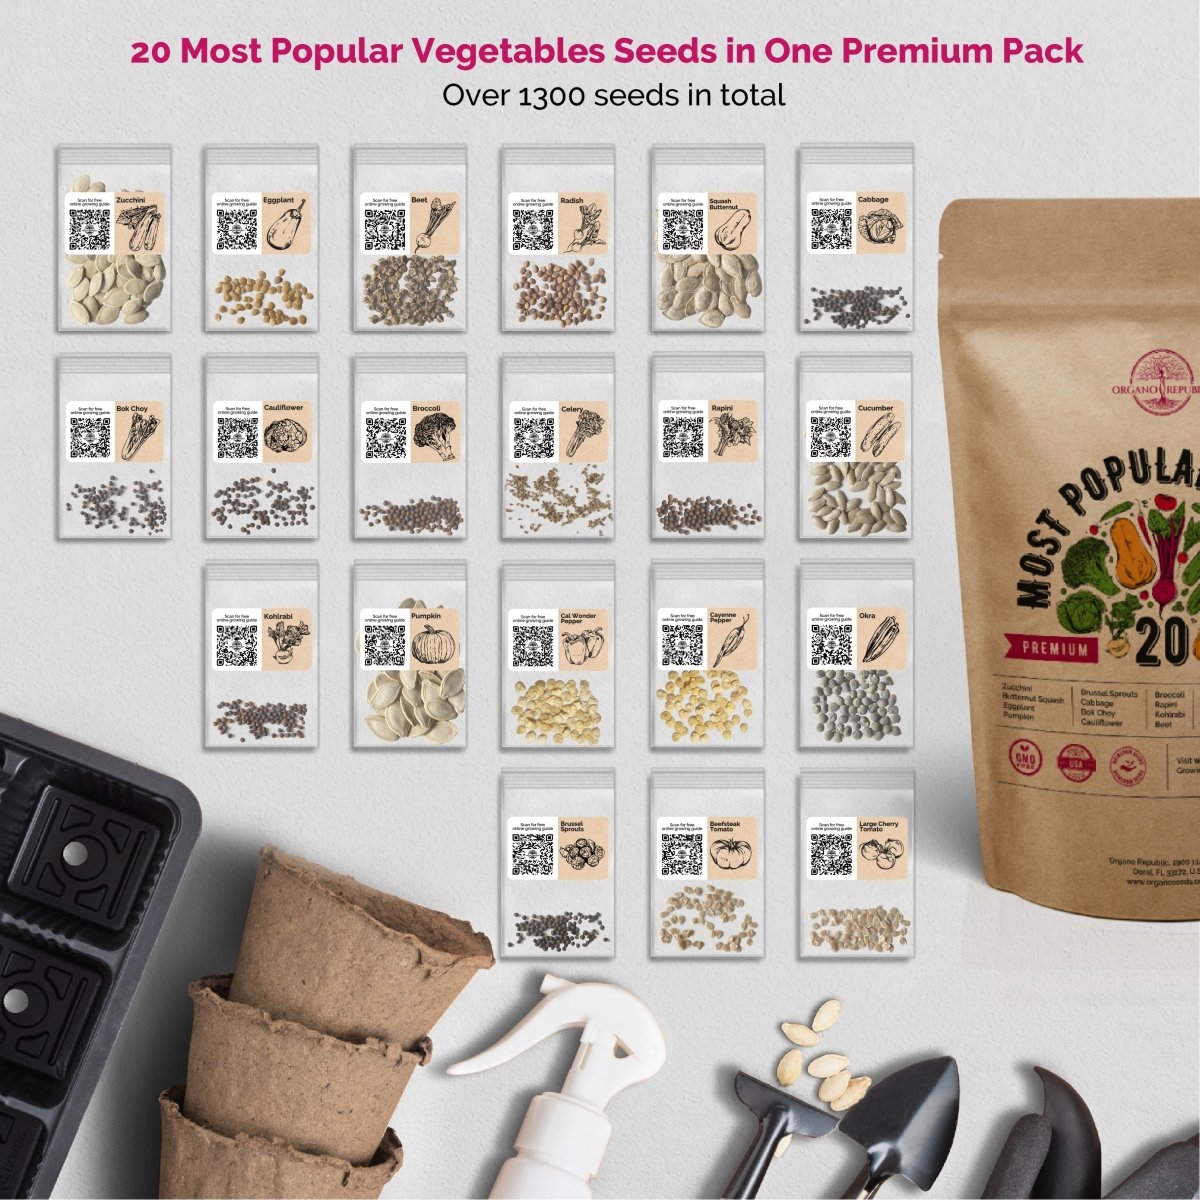 20 Most Popular Vegetables and 15 Medicinal & Tea Herb Seeds Variety Packs Bundle Non-GMO Heirloom Seeds for Planting Indoor and Outdoor Over 4900 Herbs & Vegetables Seeds in One Value Bundle - Organo Republic